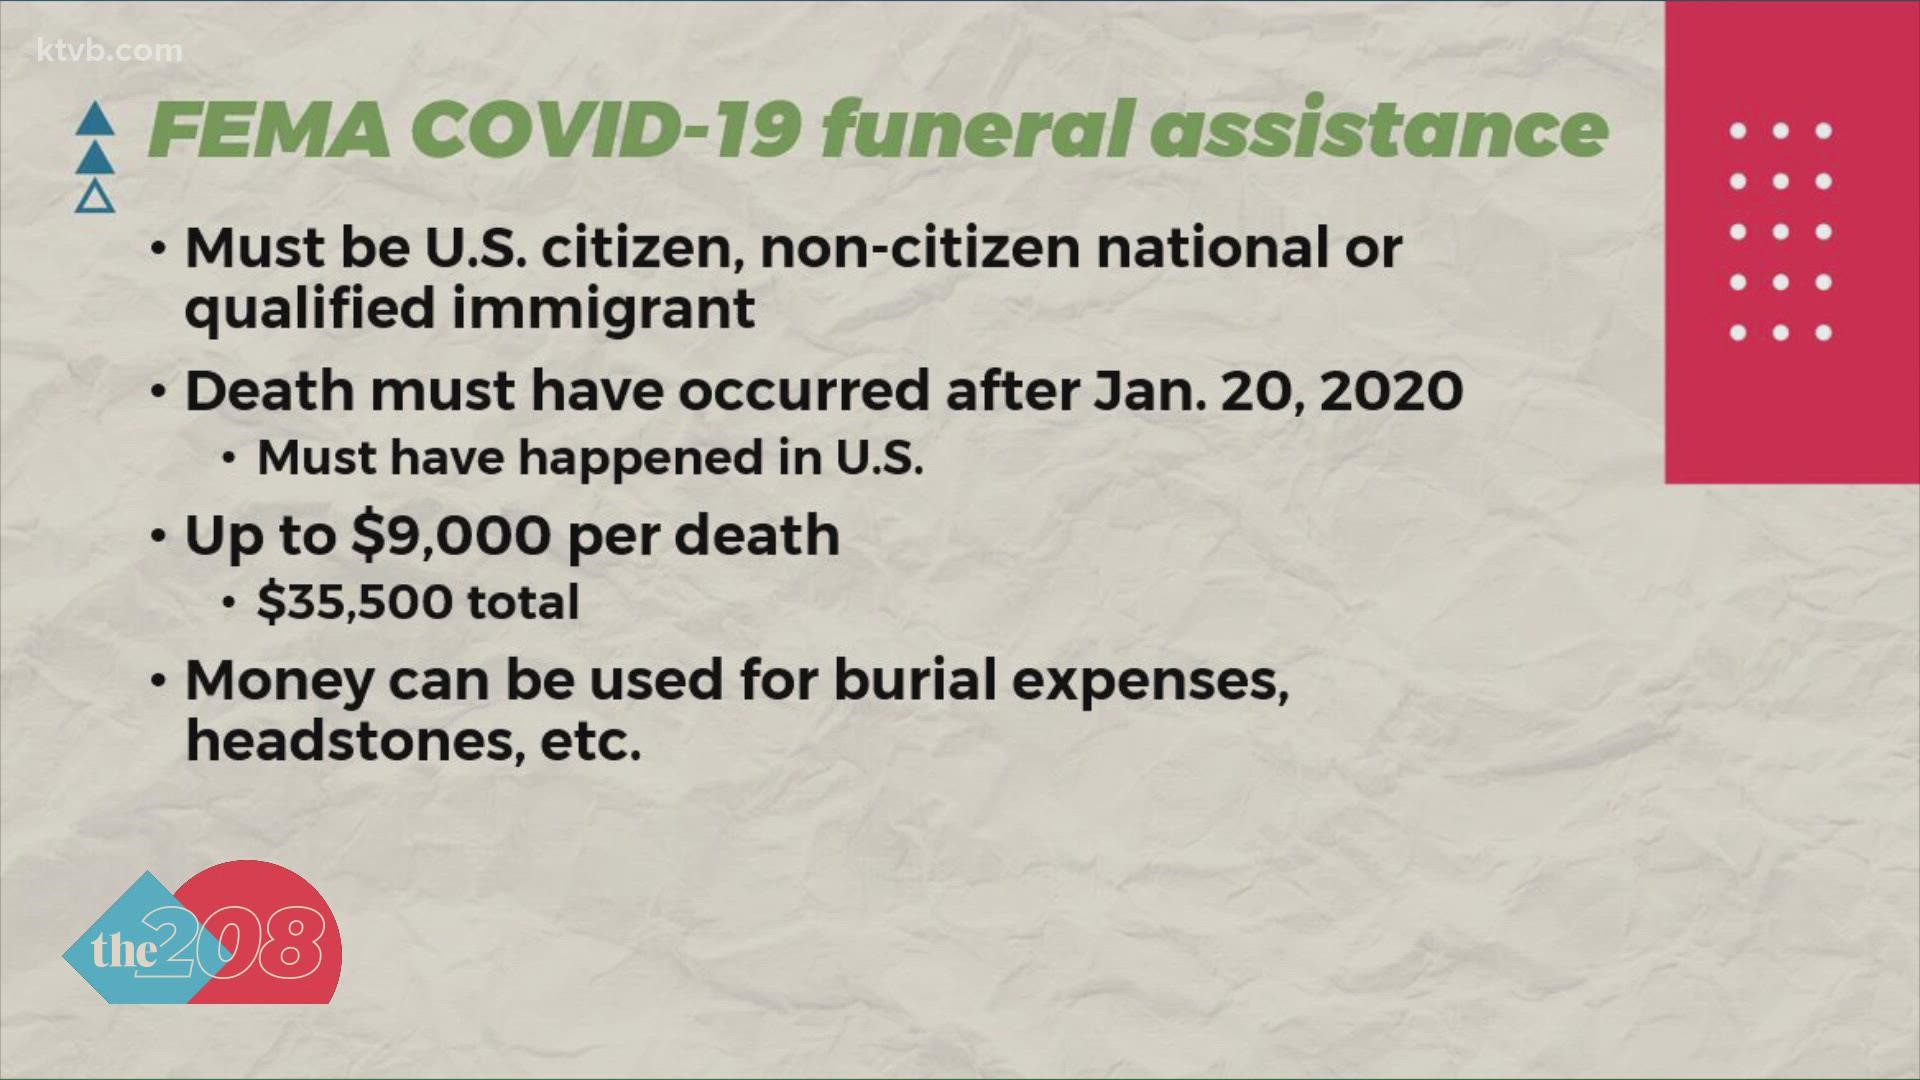 You can get up to $9,000 from FEMA to help with funeral expenses if a loved one died from COVID.